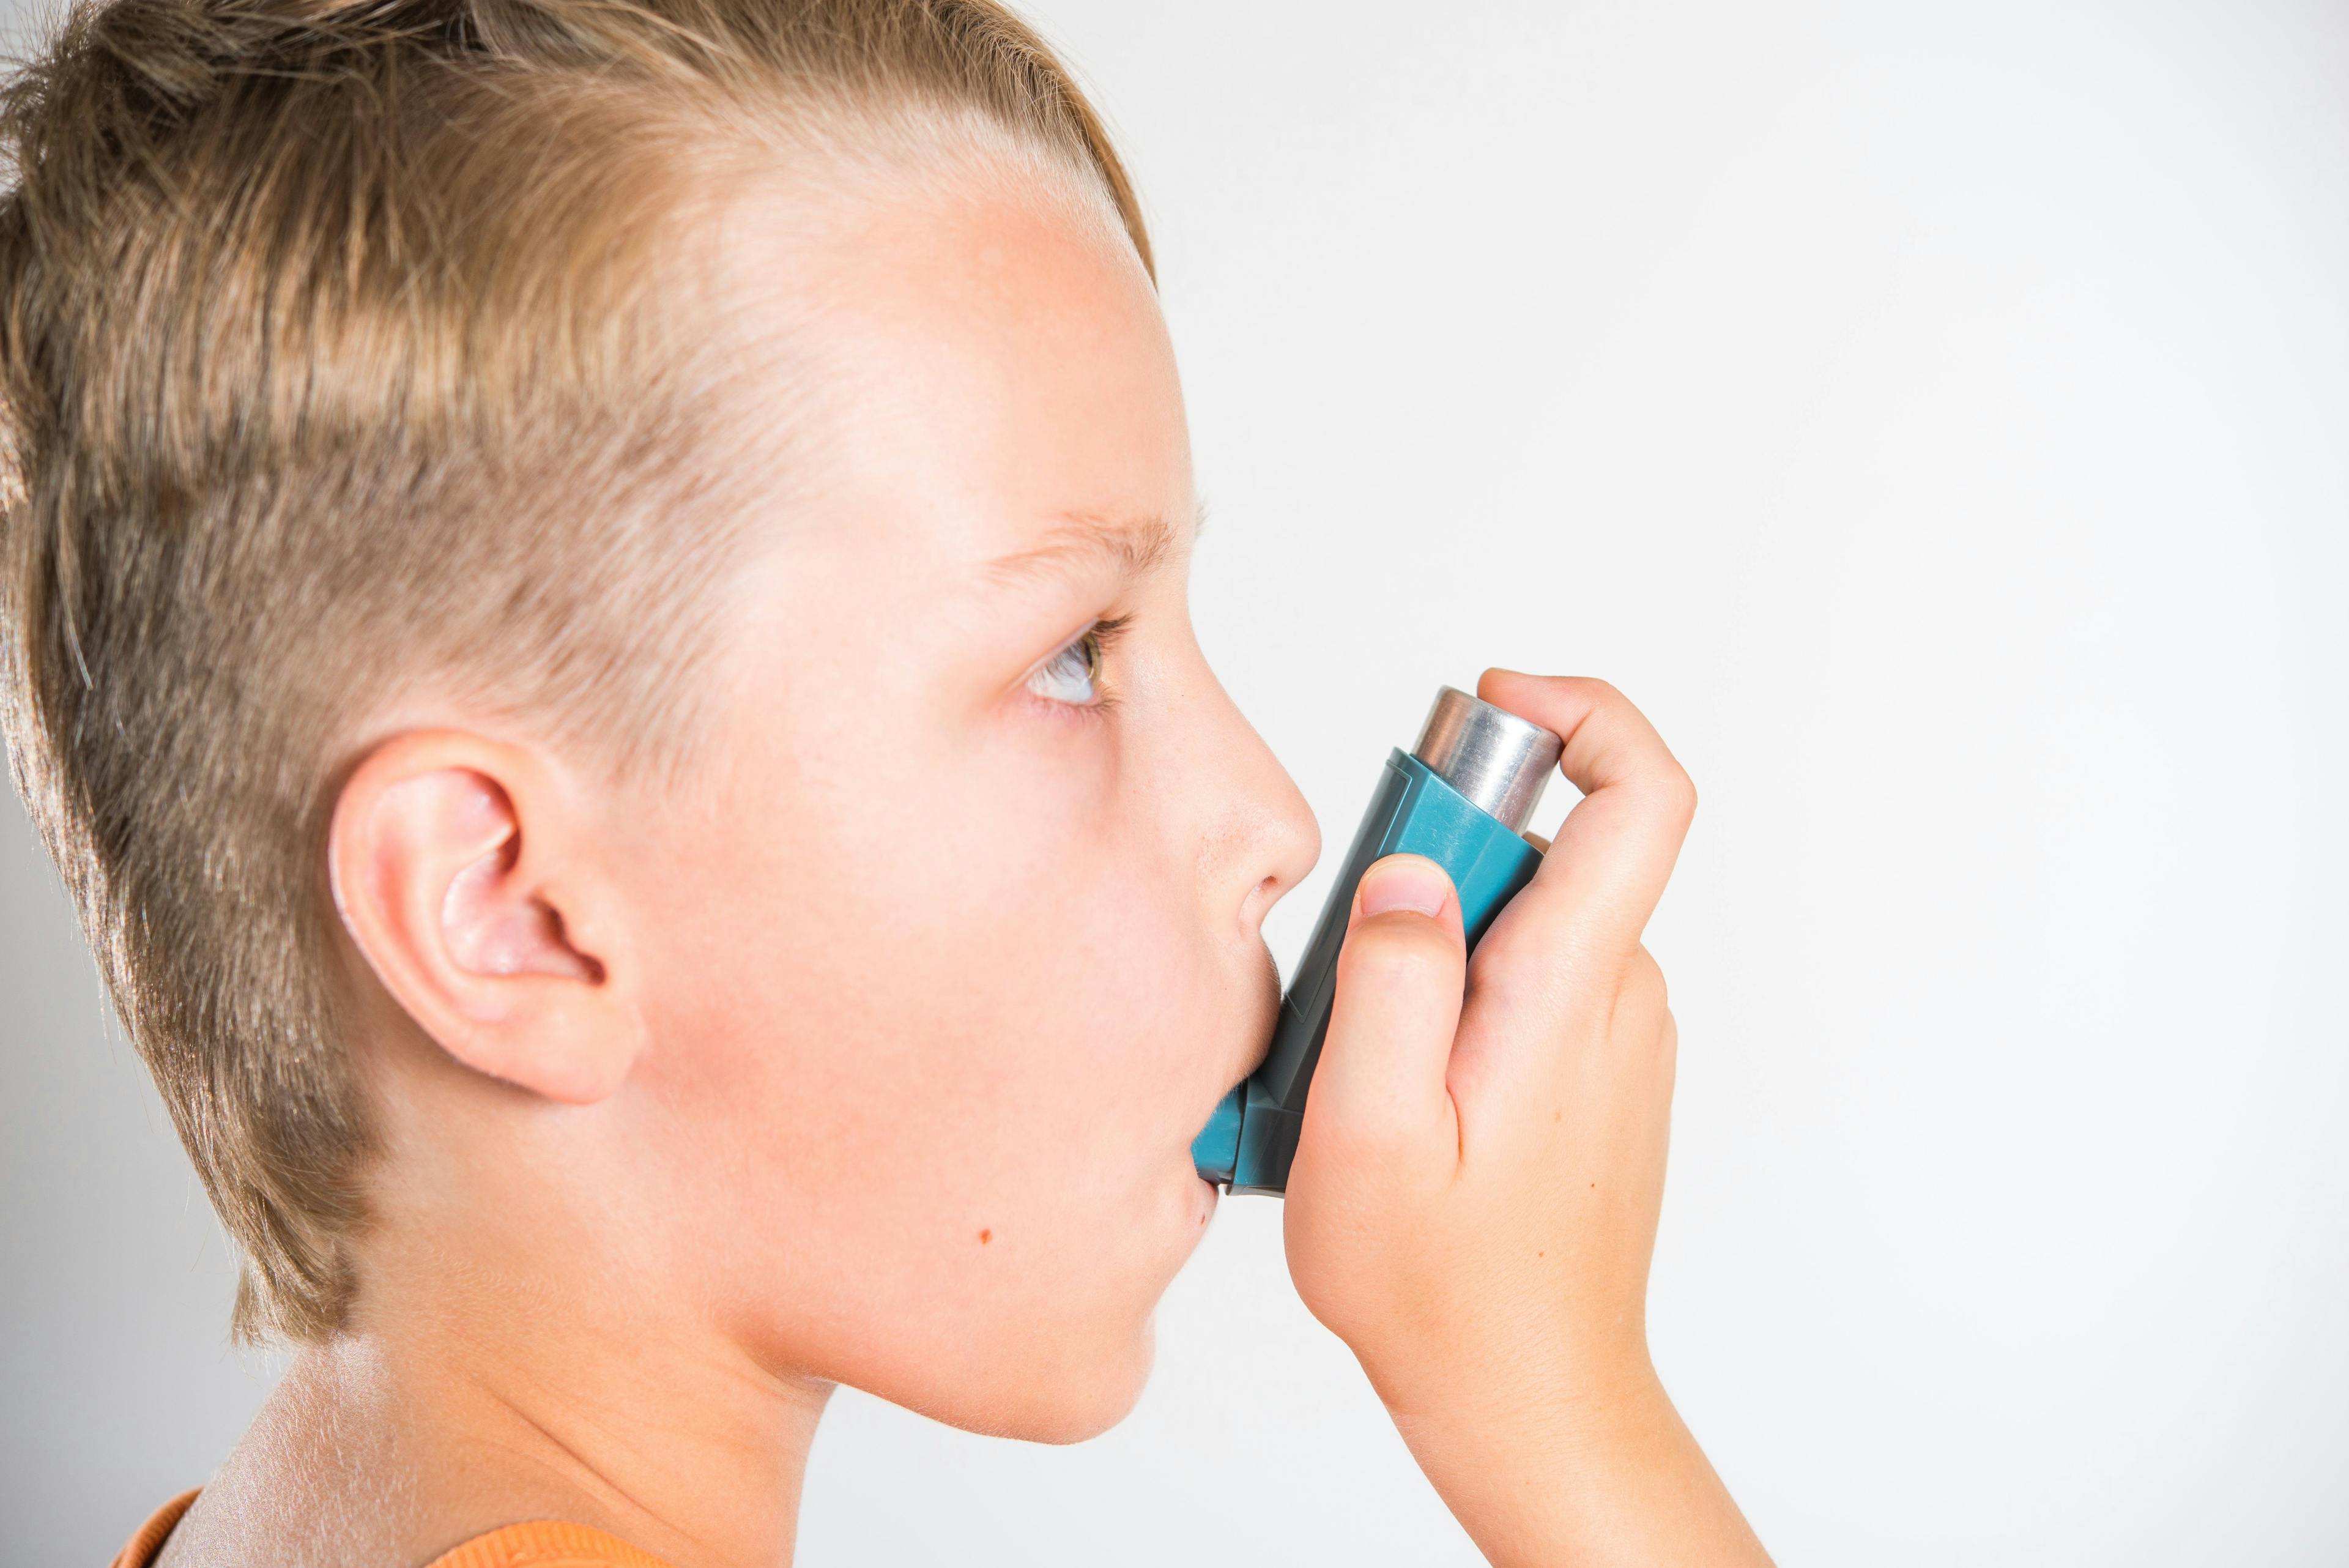 Best practices for pediatricians in diagnosing and treating asthma | Image Credit: © Анна Ковальчук - © Анна Ковальчук - stock.adobe.com.